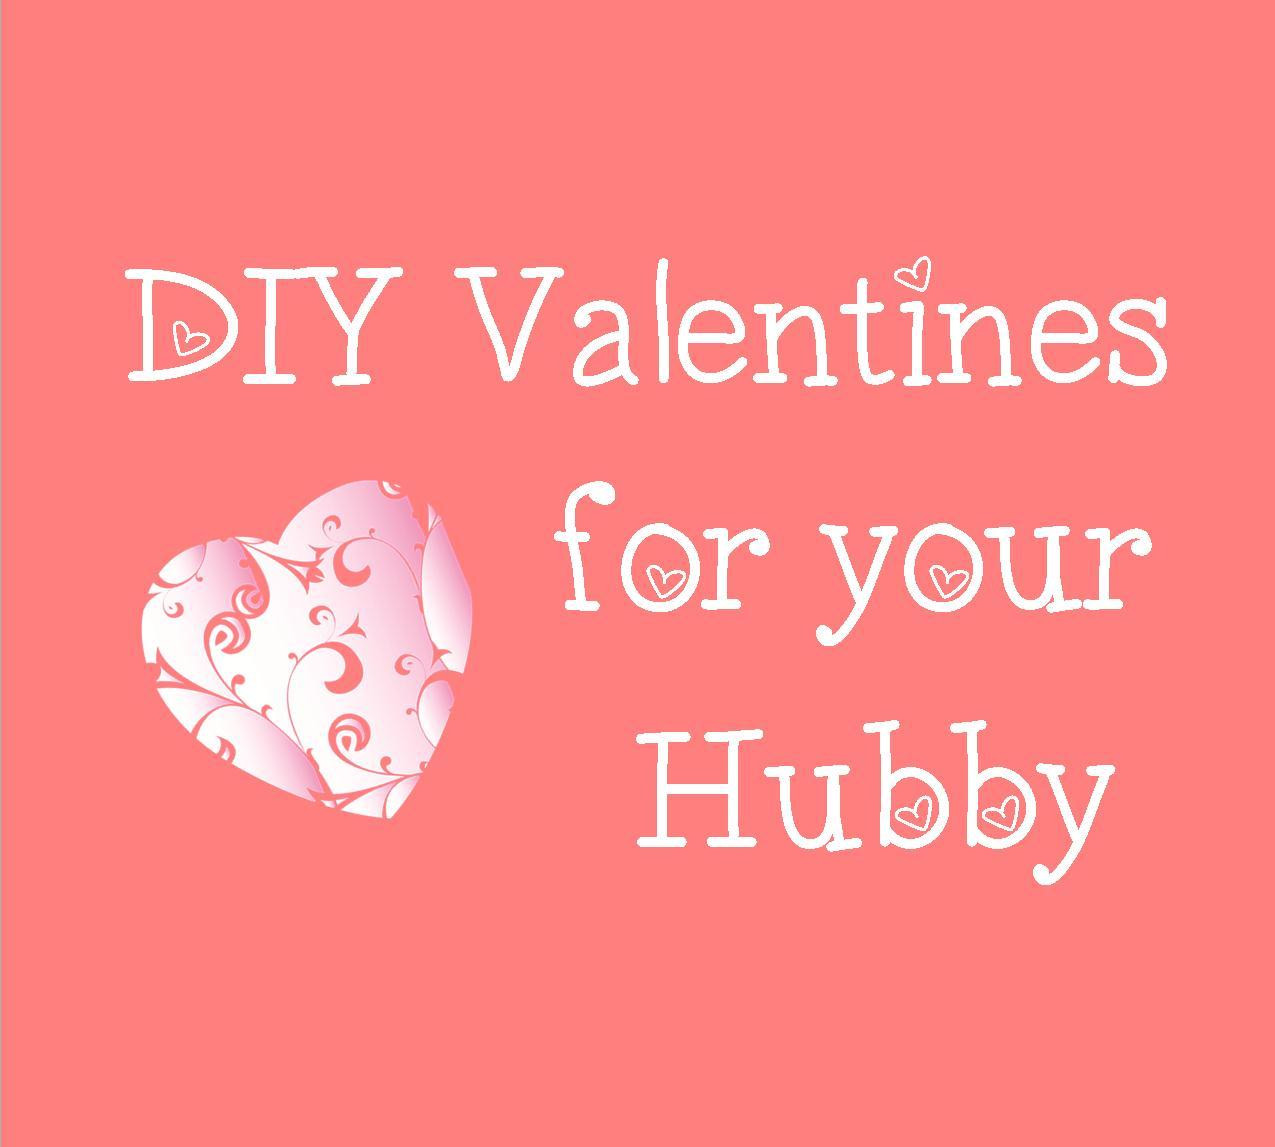 Valentines Day Ideas For Husband
 Crafty WI Mama Valentines for the Hubby